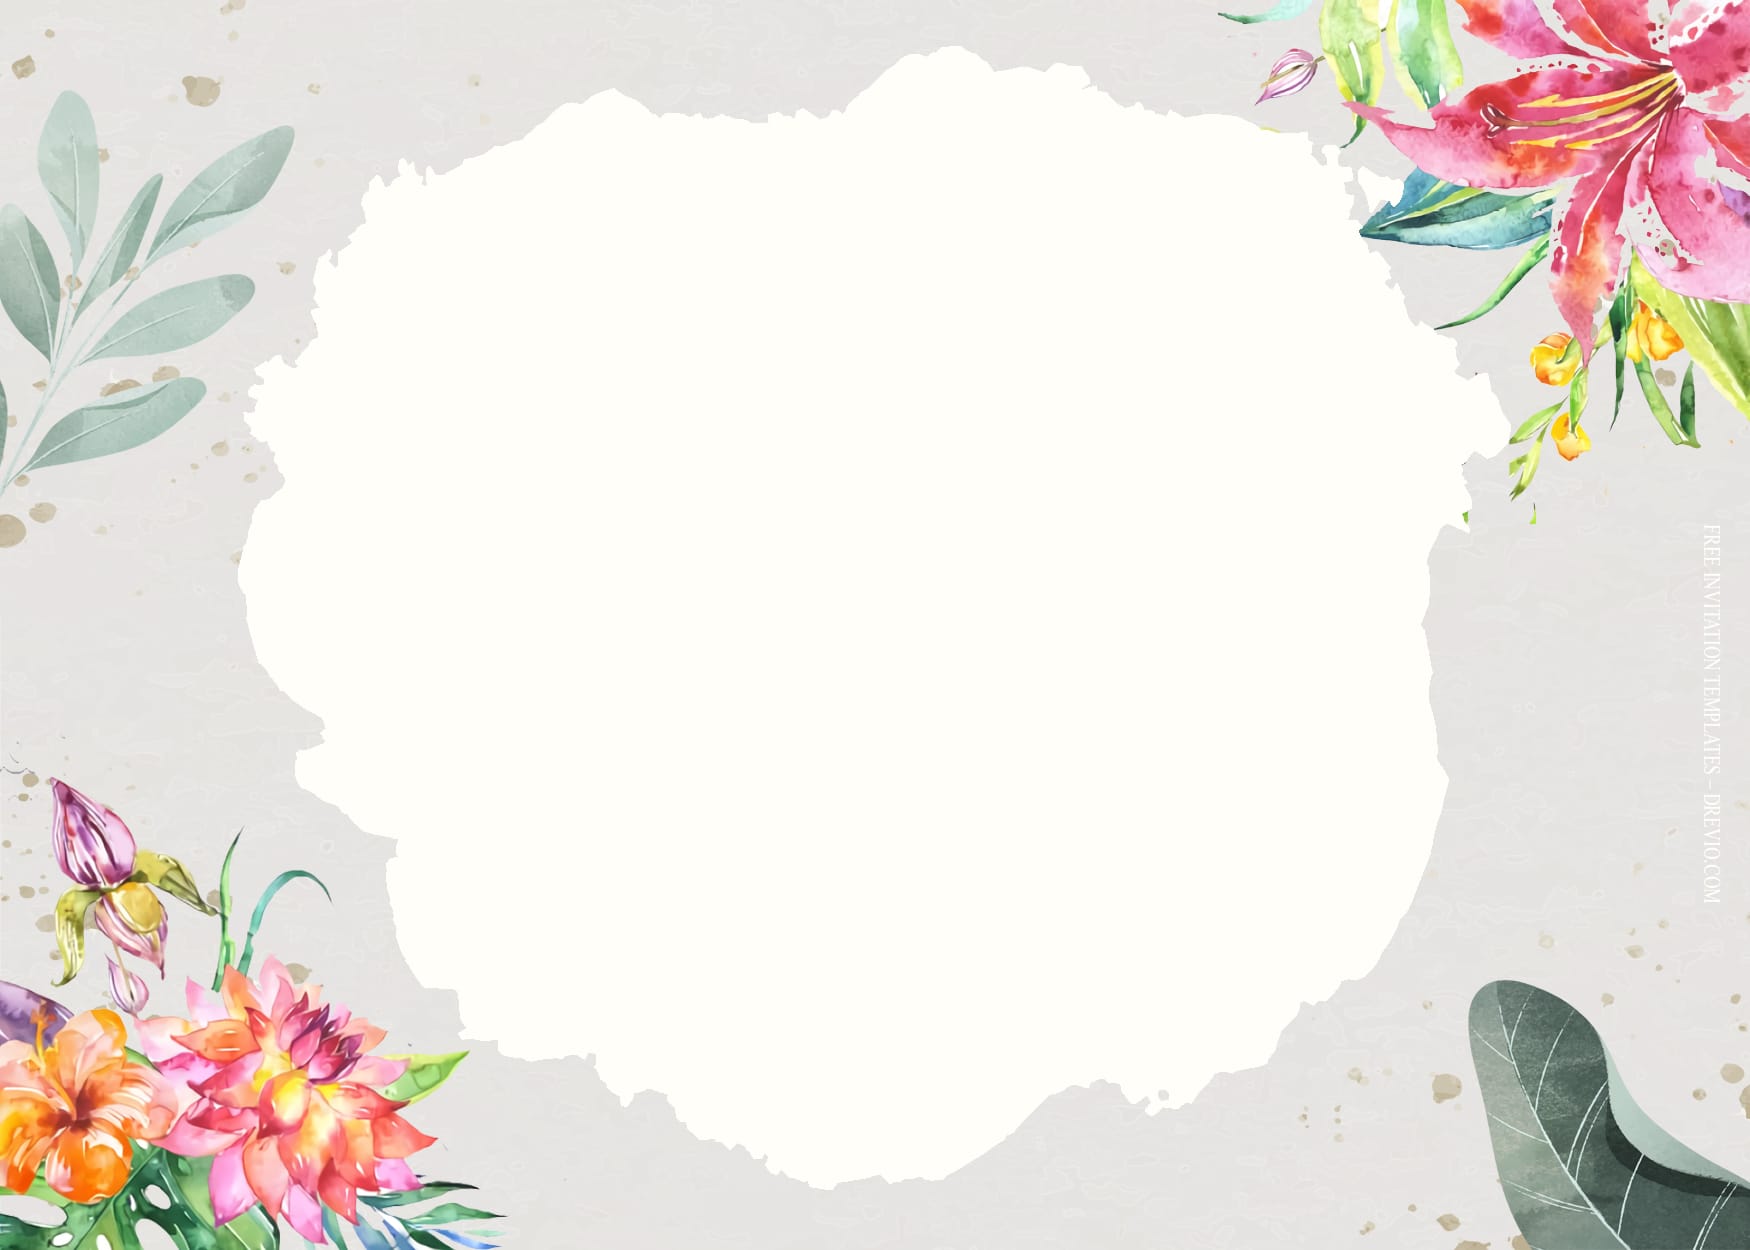 7+ Tropical Bang Watercolor Floral Wedding Invitation Templates Type Four